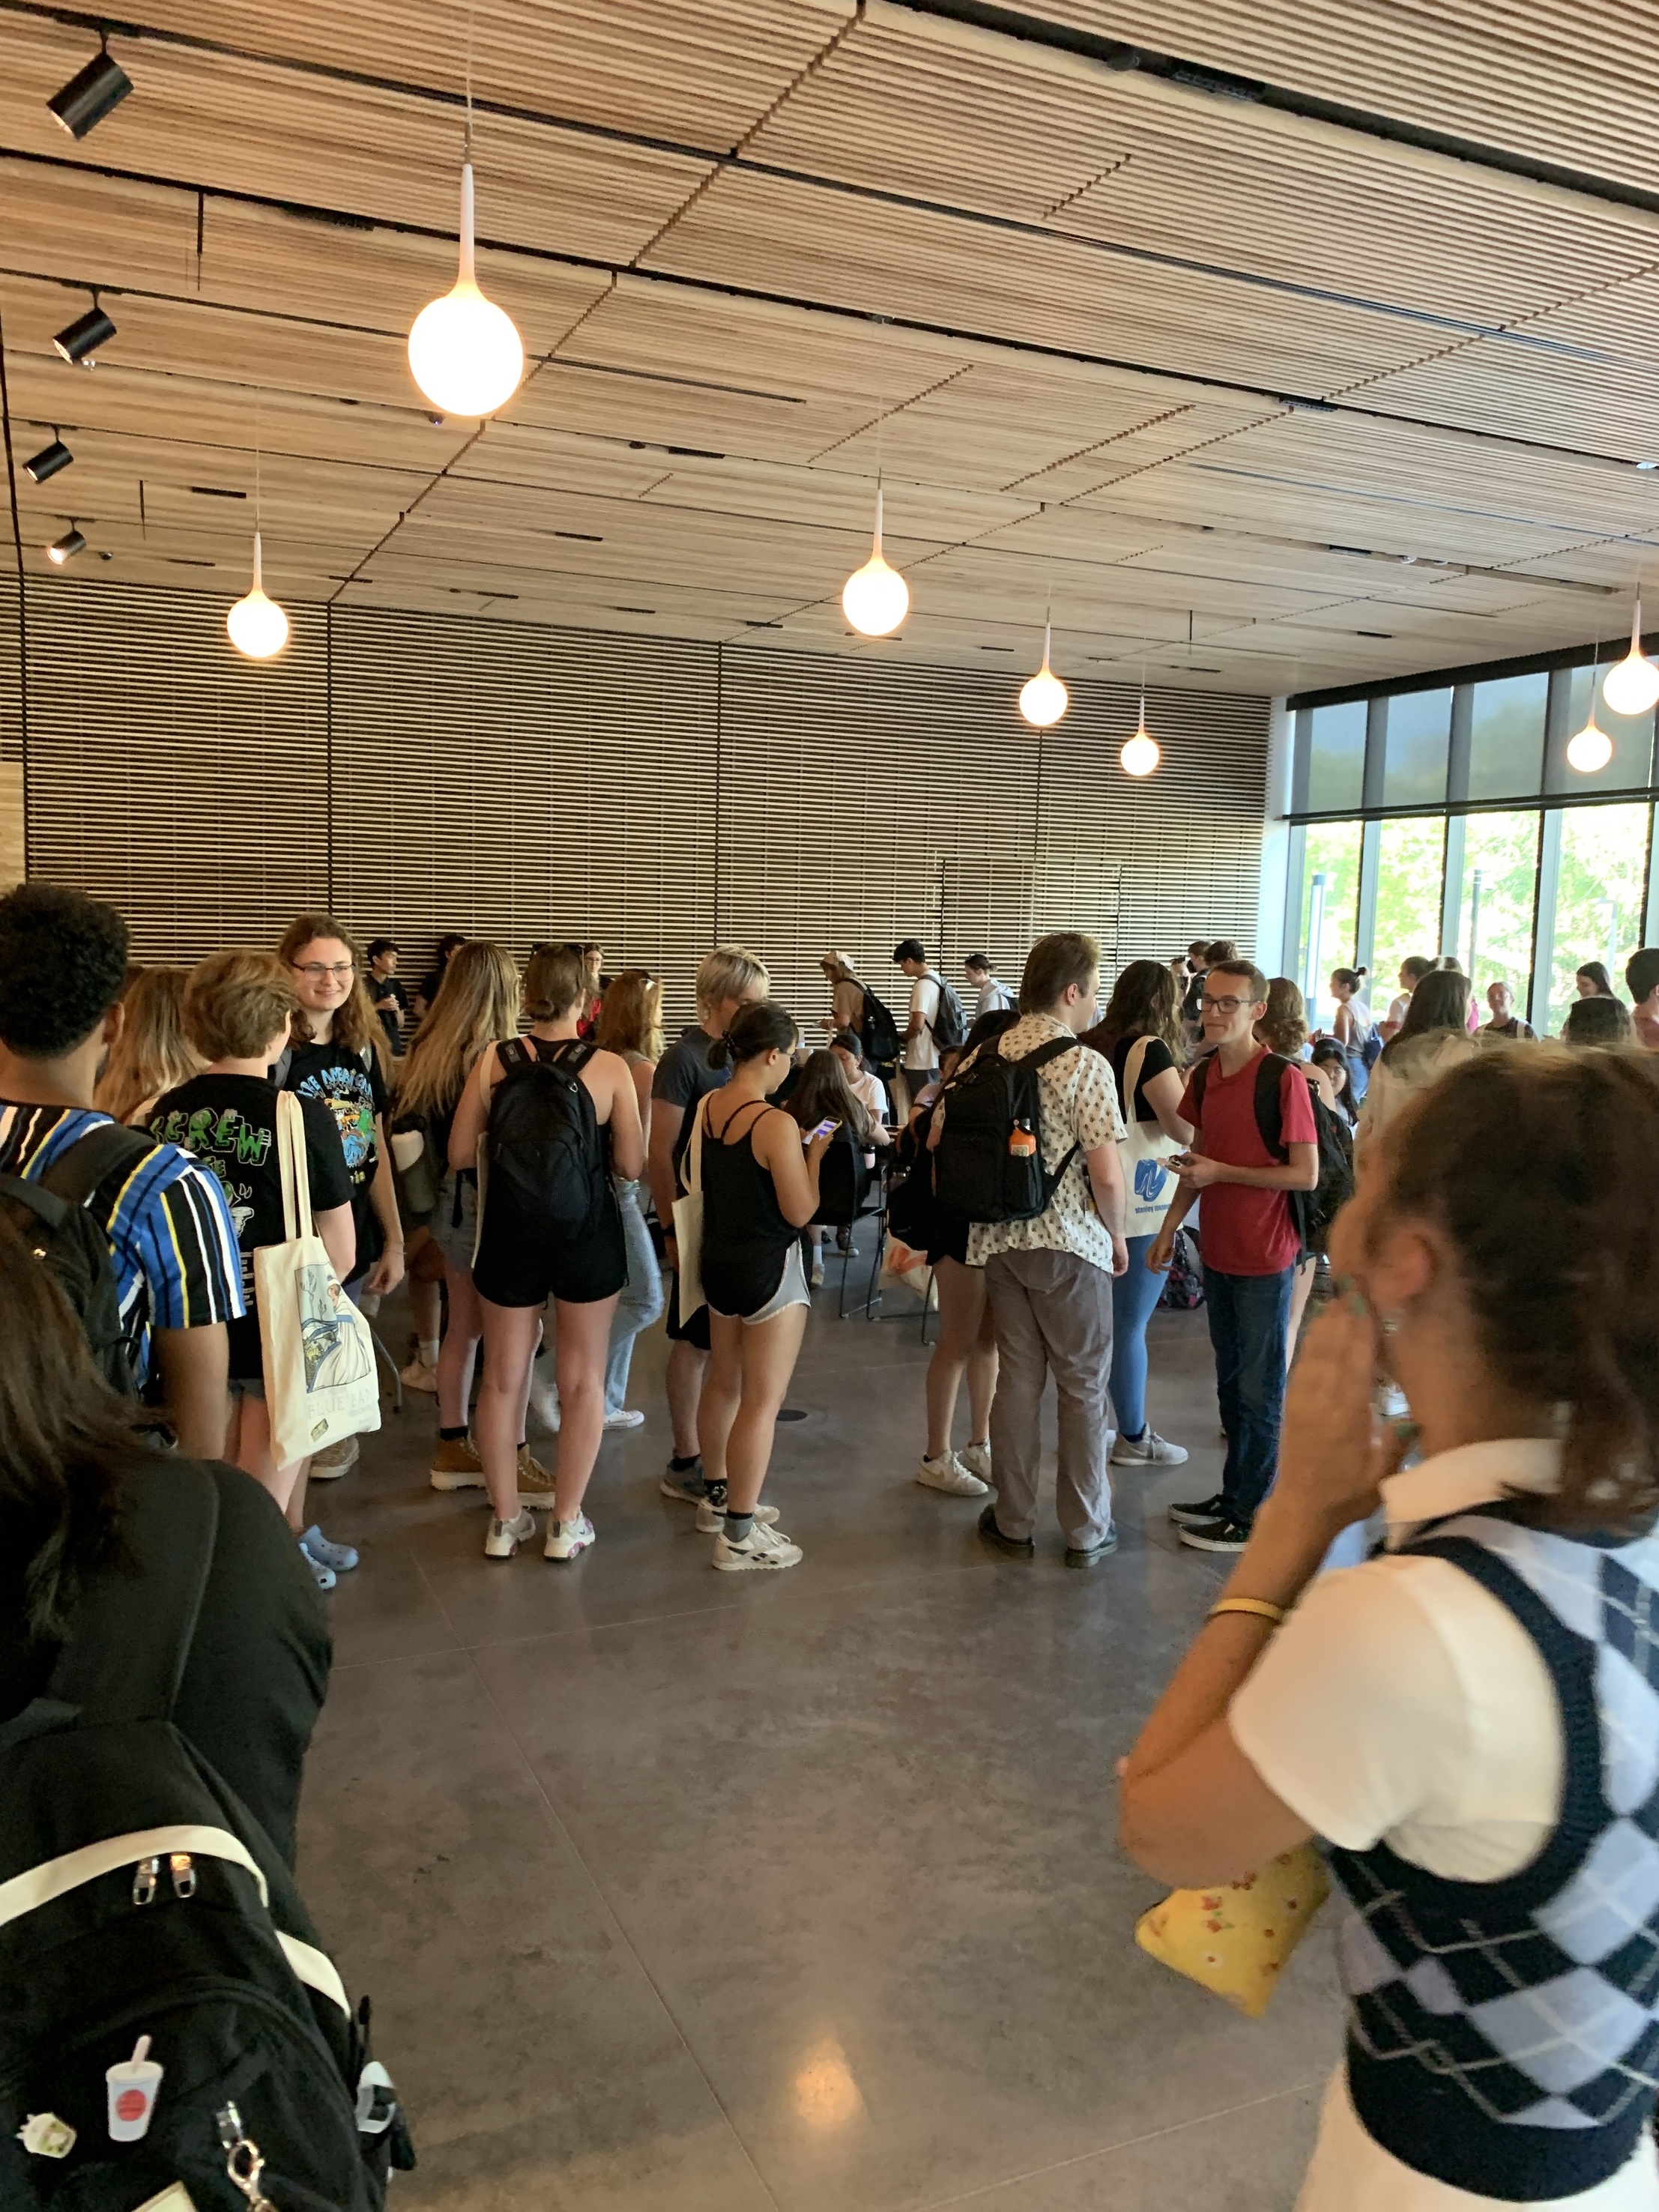 A large group of students in the lobby of a museum